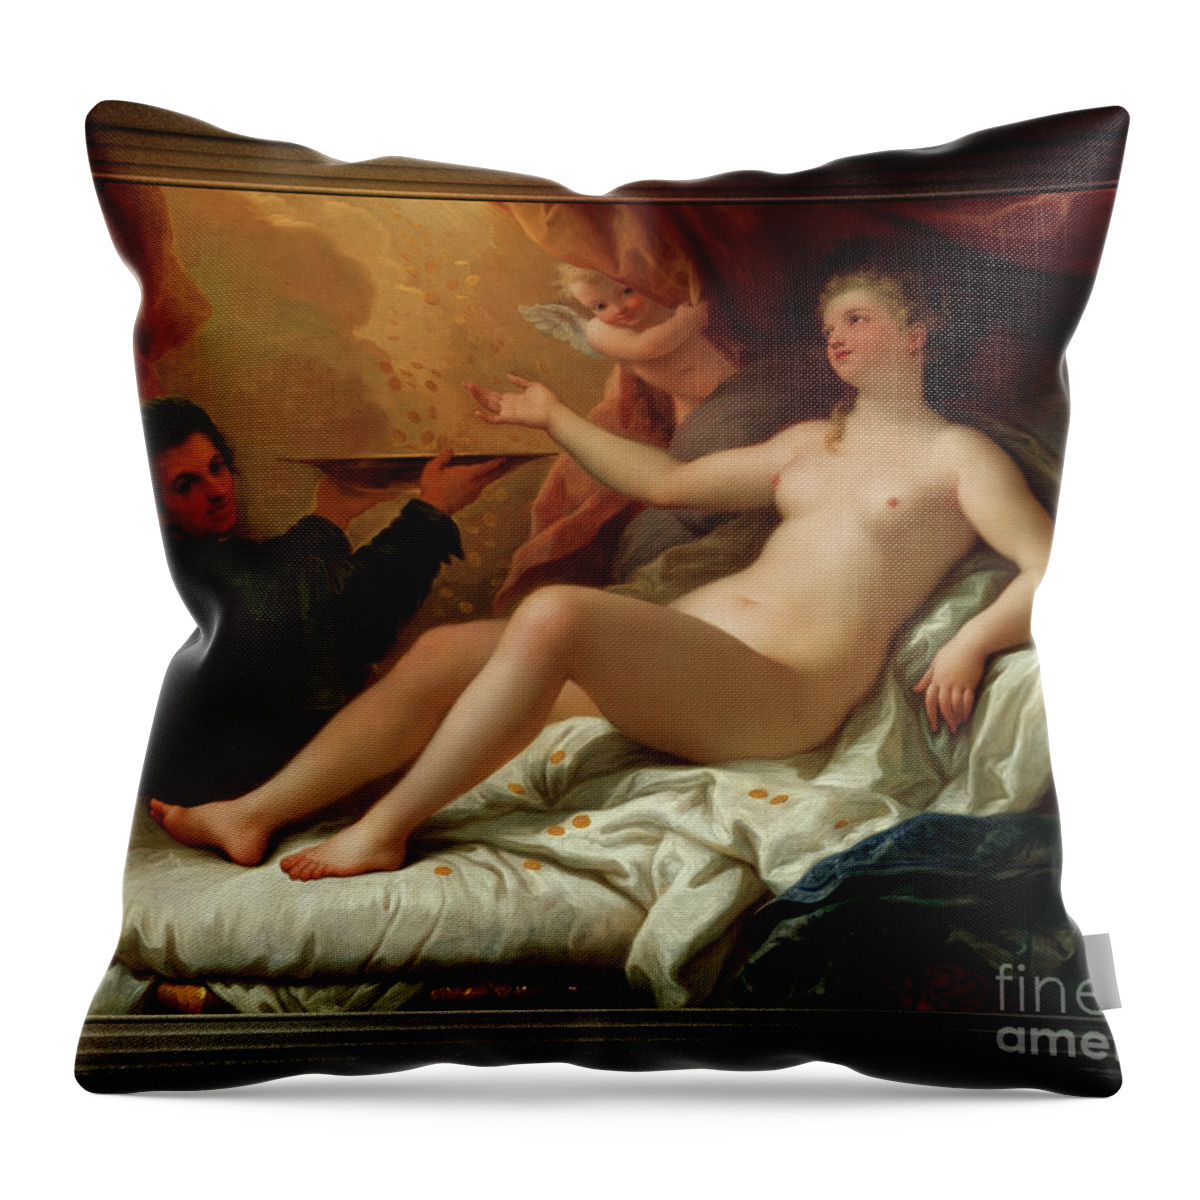 Danaë Throw Pillow featuring the painting Danae by Paolo de Matteis Old Masters Classical Art Reproduction by Rolando Burbon